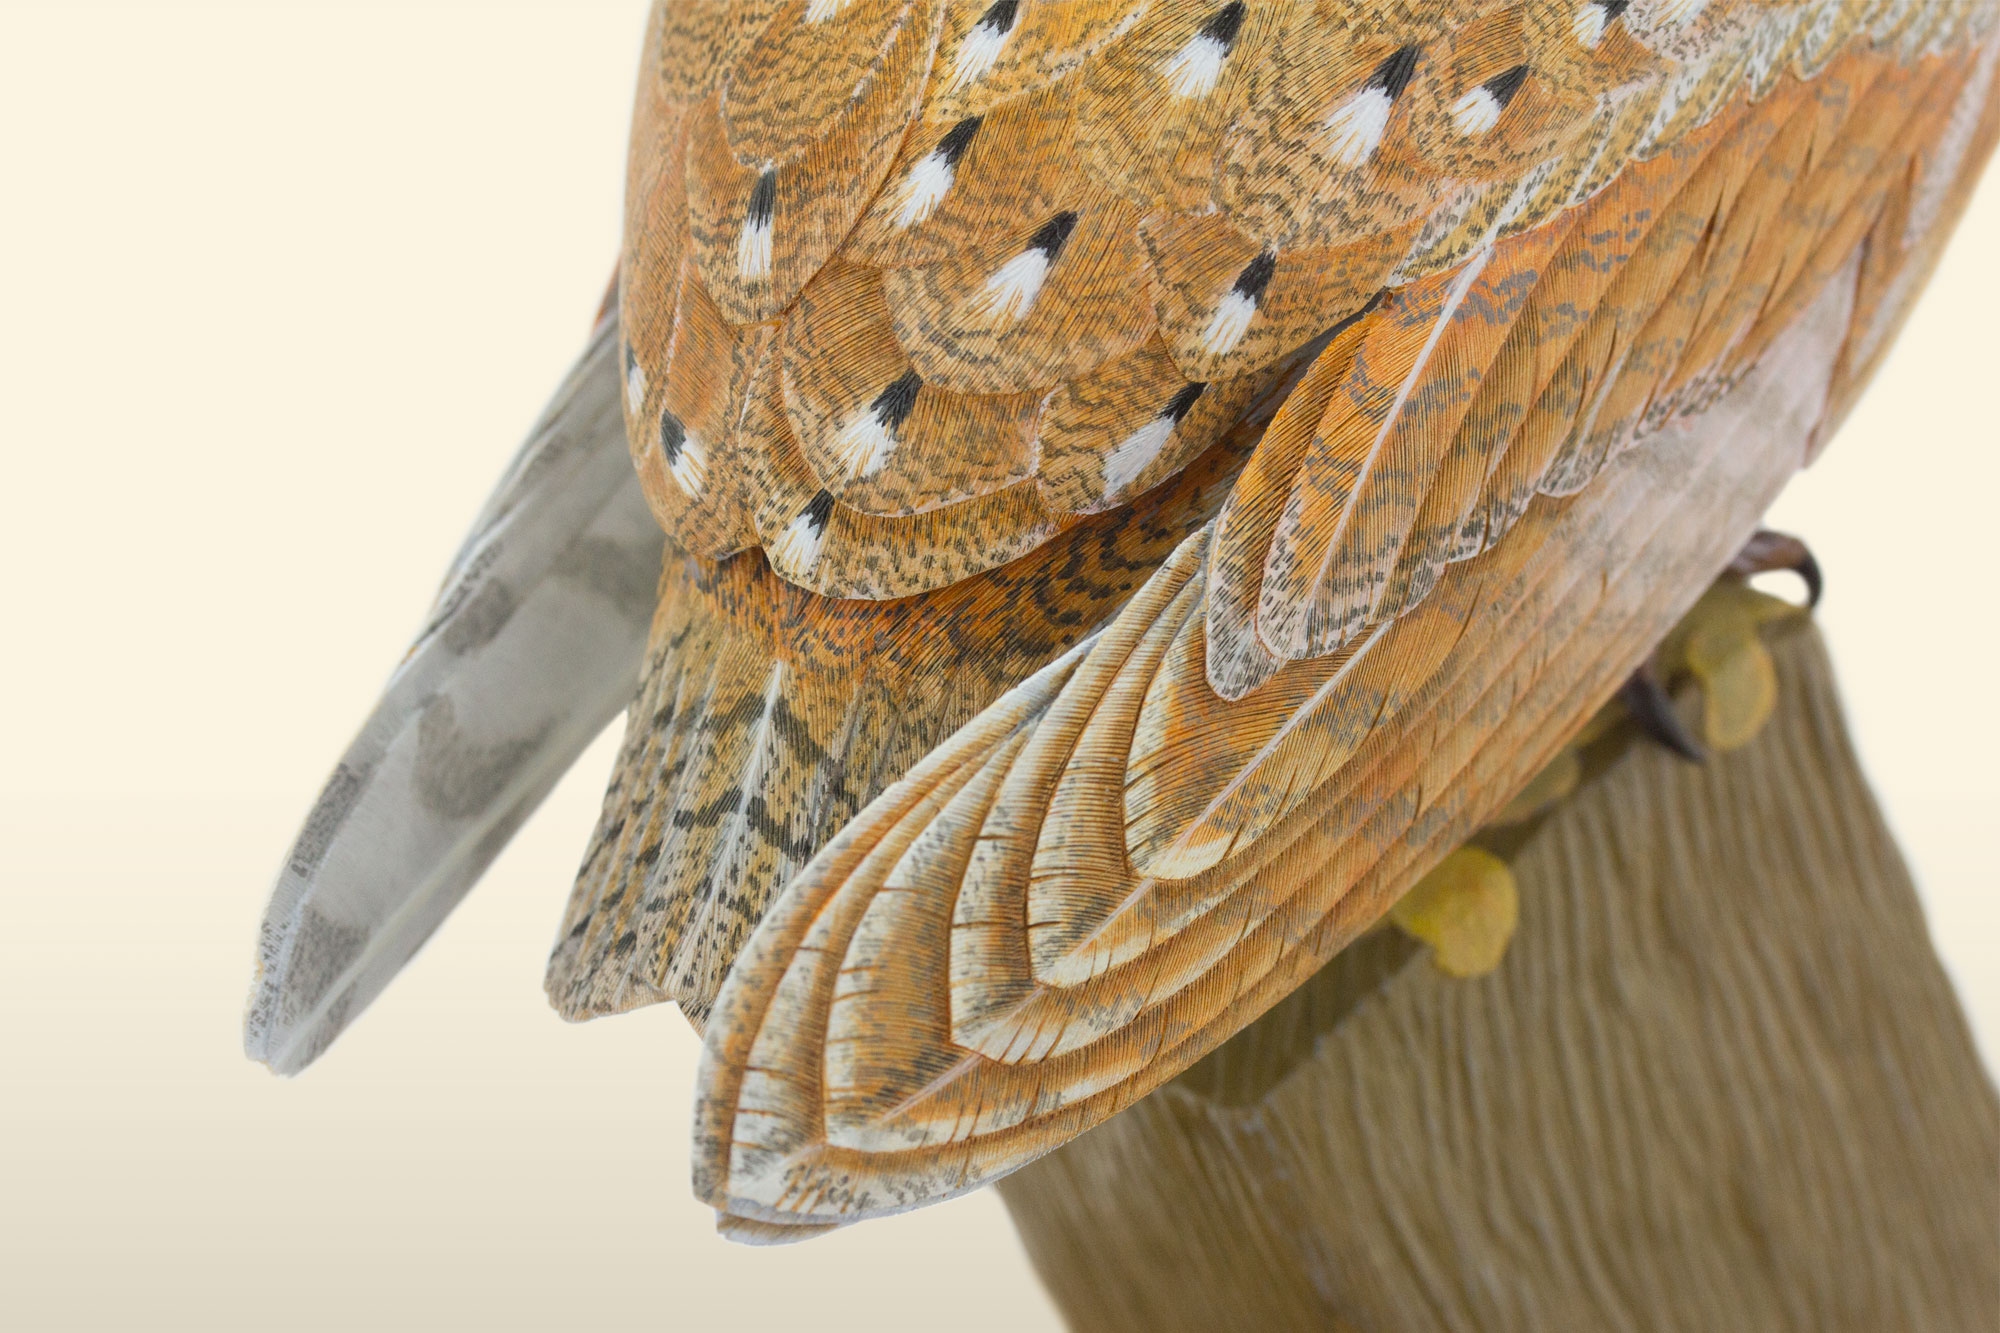 Barn owl bird carving, tail detail, by Feathercarver David Patrick-Brown